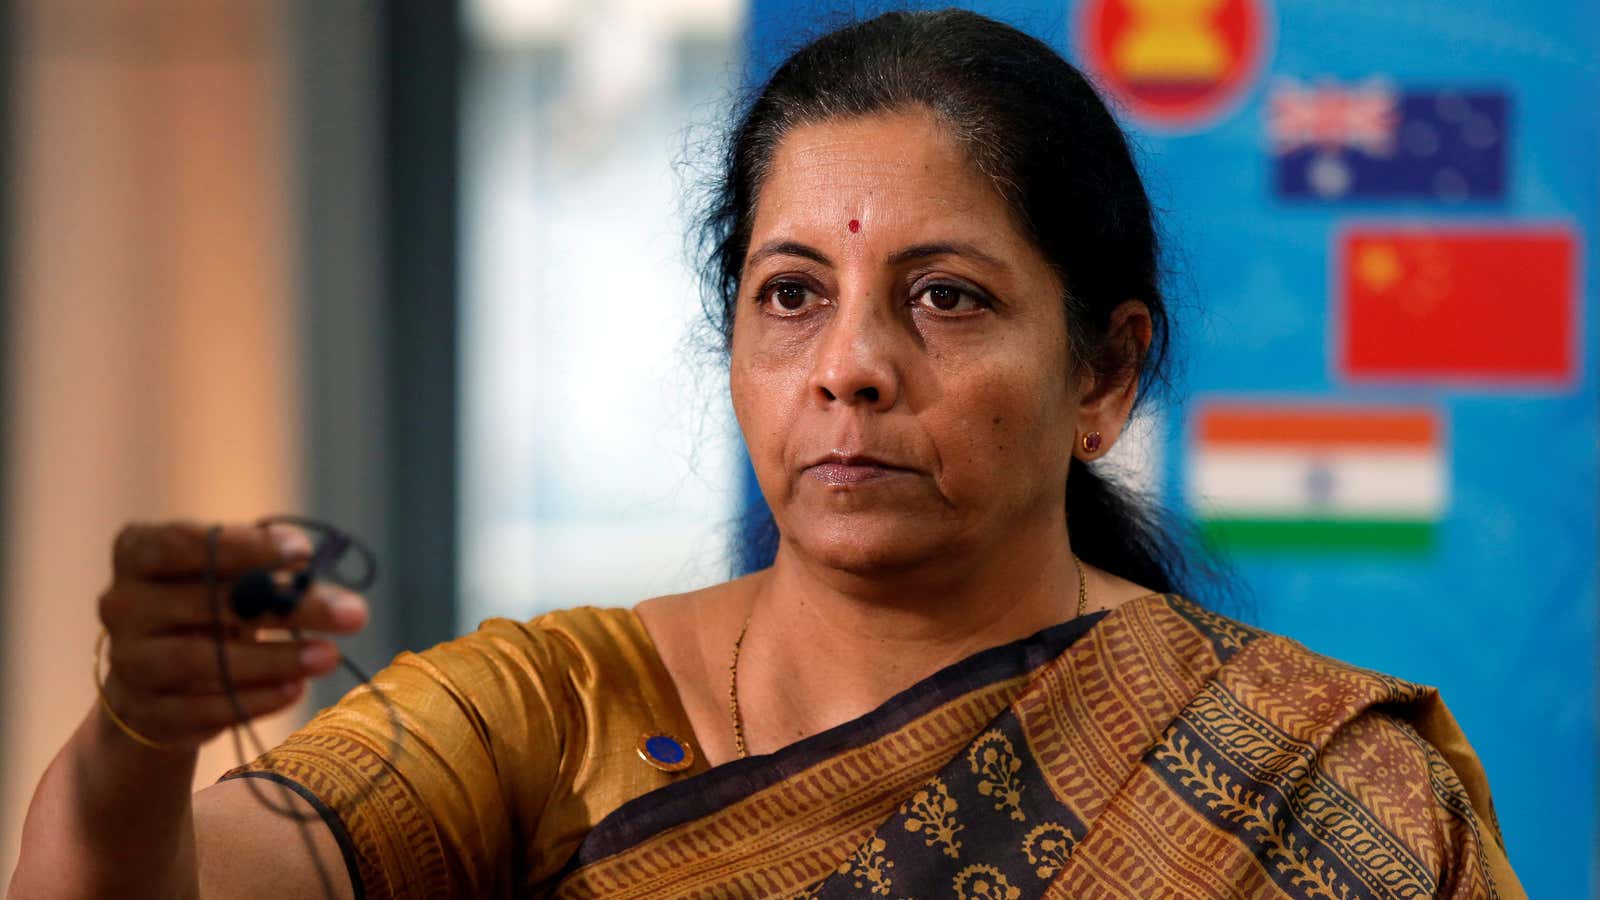 India’s new finance minister Nirmala Sitharaman will represent the country at G20 tax discussions in Tokyo.